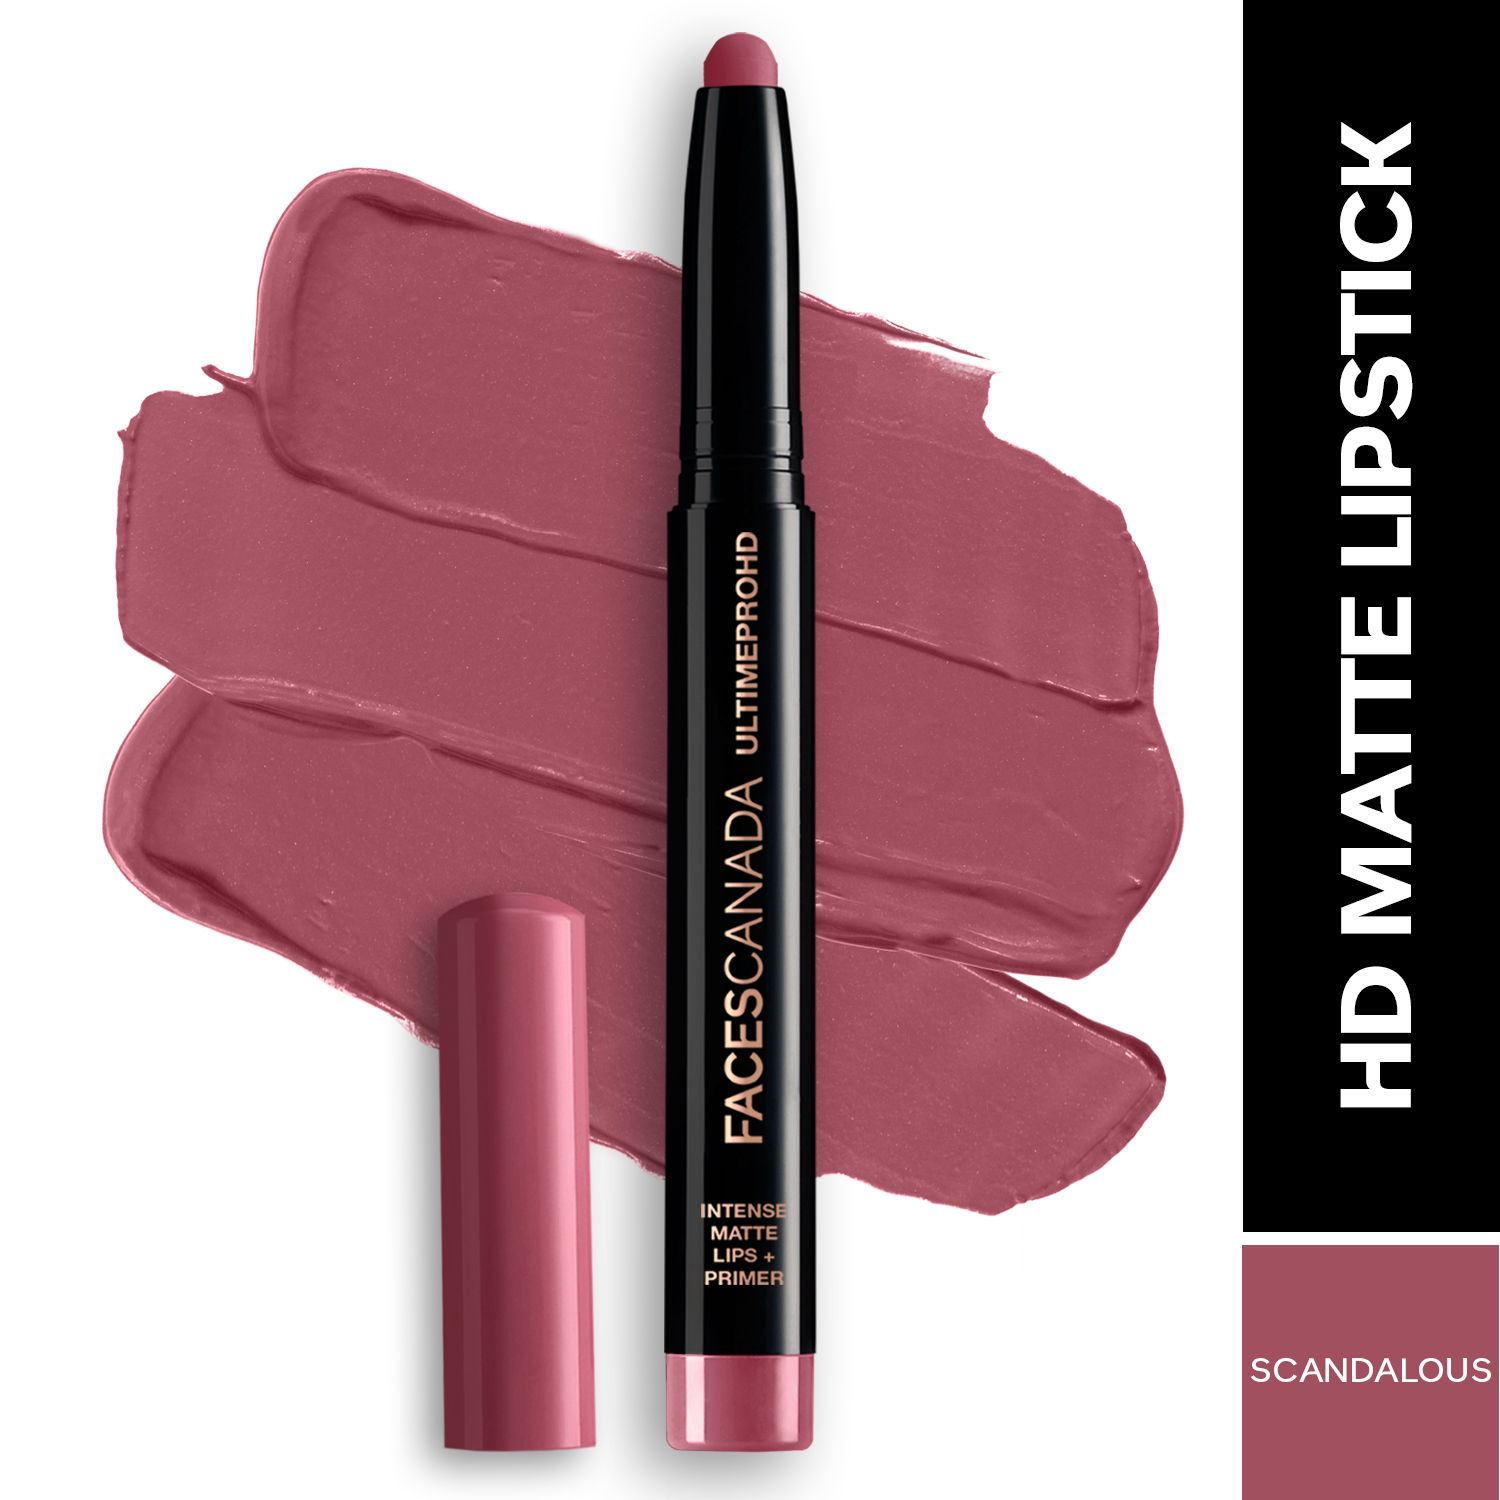 Buy FACES CANADA Ultime Pro HD Intense Matte Lipstick + Primer - Scandalous, 1.4g | 9HR Long Stay | Feather-Light Comfort | Intense Color | Smooth Glide - Purplle